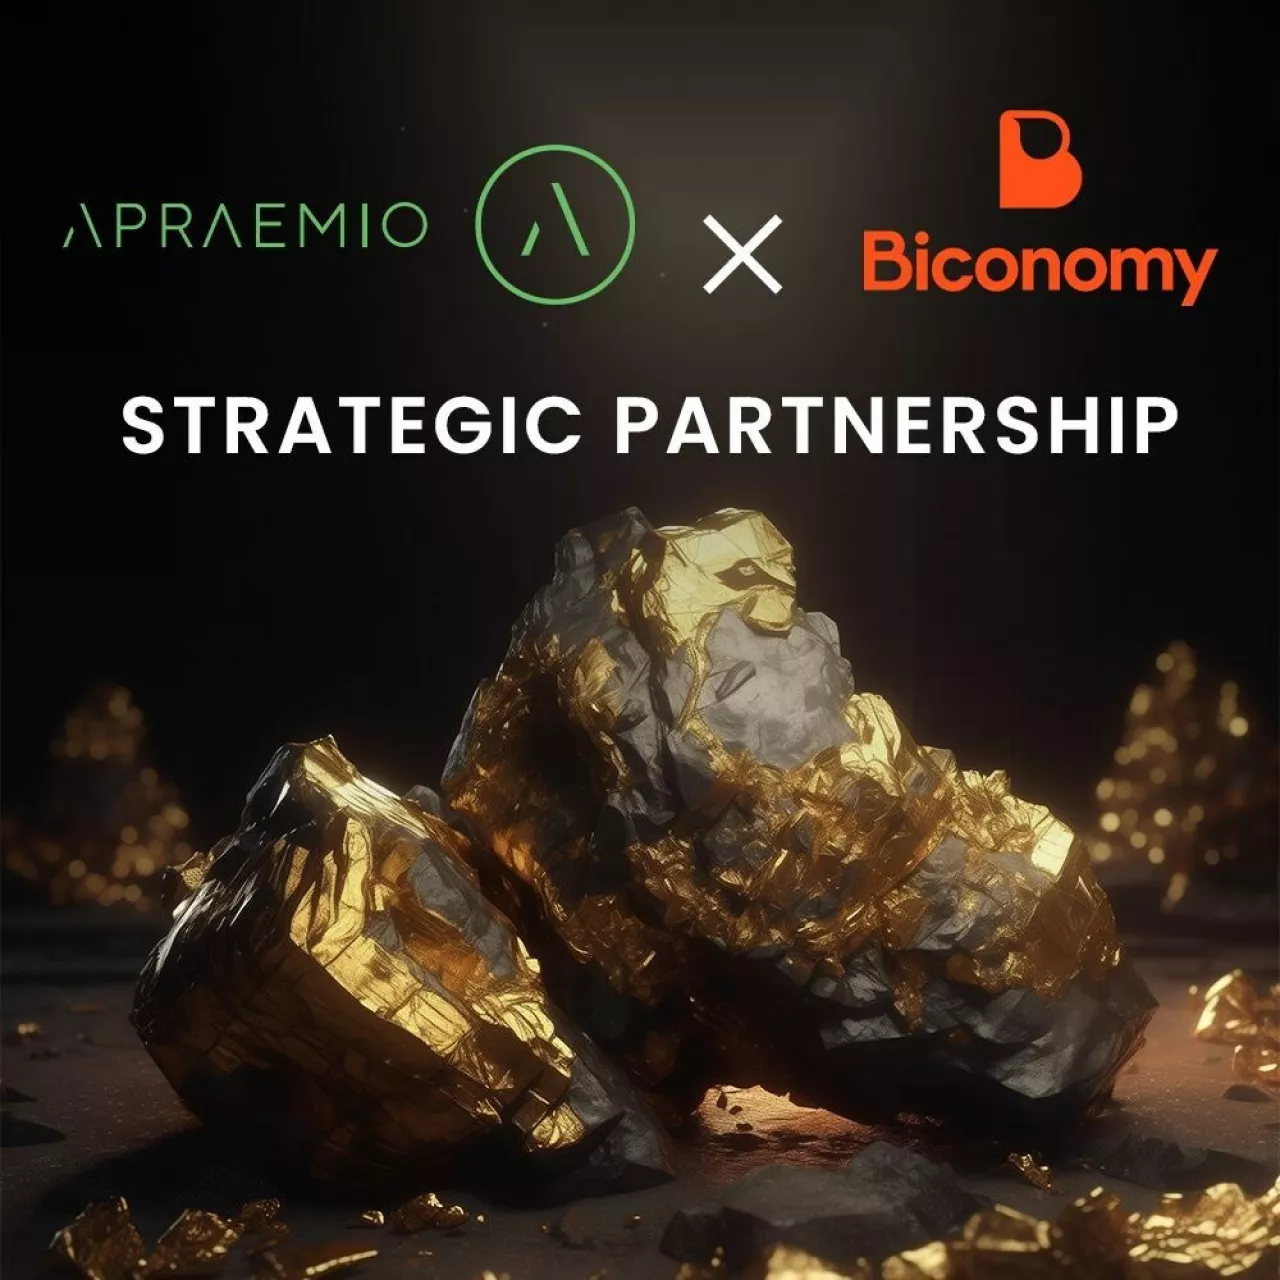 Apraemio and Biconomy team up to enhance Web3 accessibility and integrate real-world assets